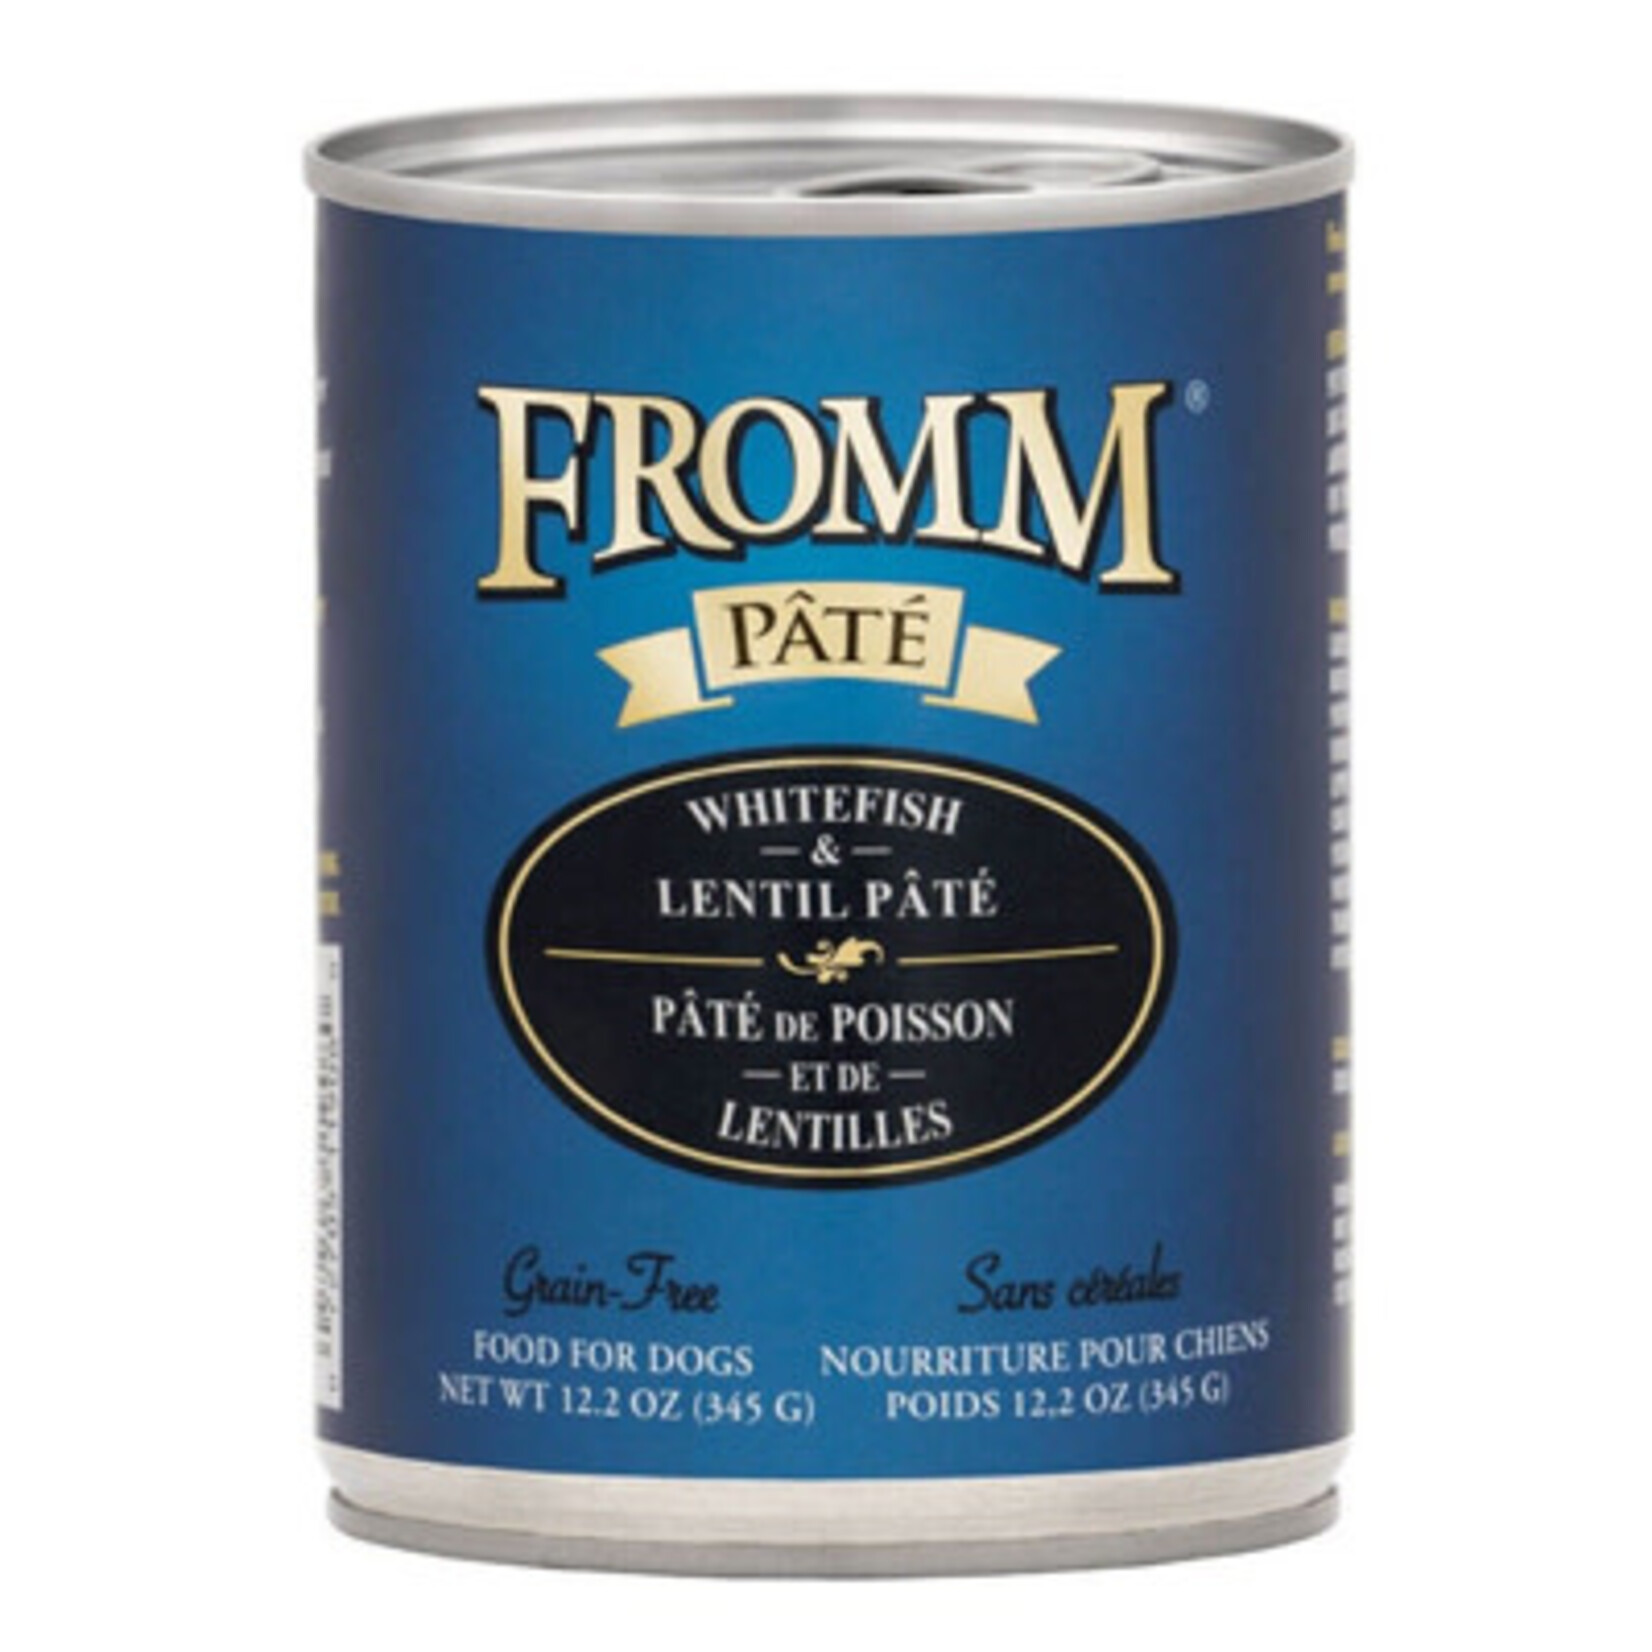 Fromm Fromm Pate 12.2oz Canned Dog Food